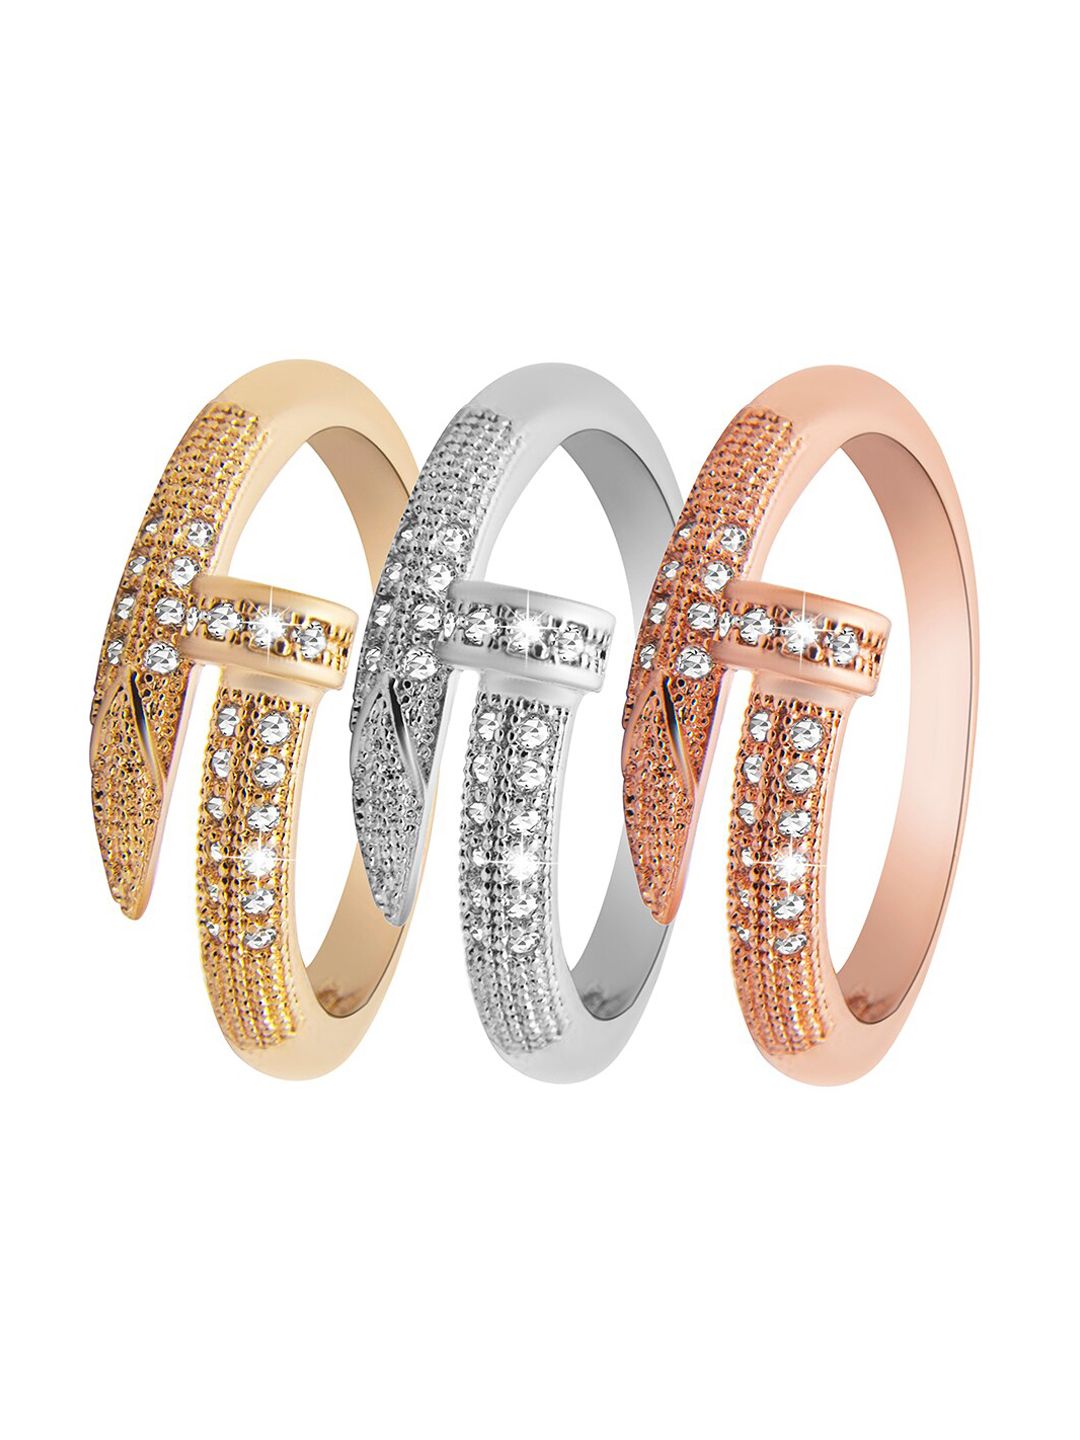 Moon Dust Set Of 3 Rose Gold-Plated White CZ-Studded Finger Rings Price in India